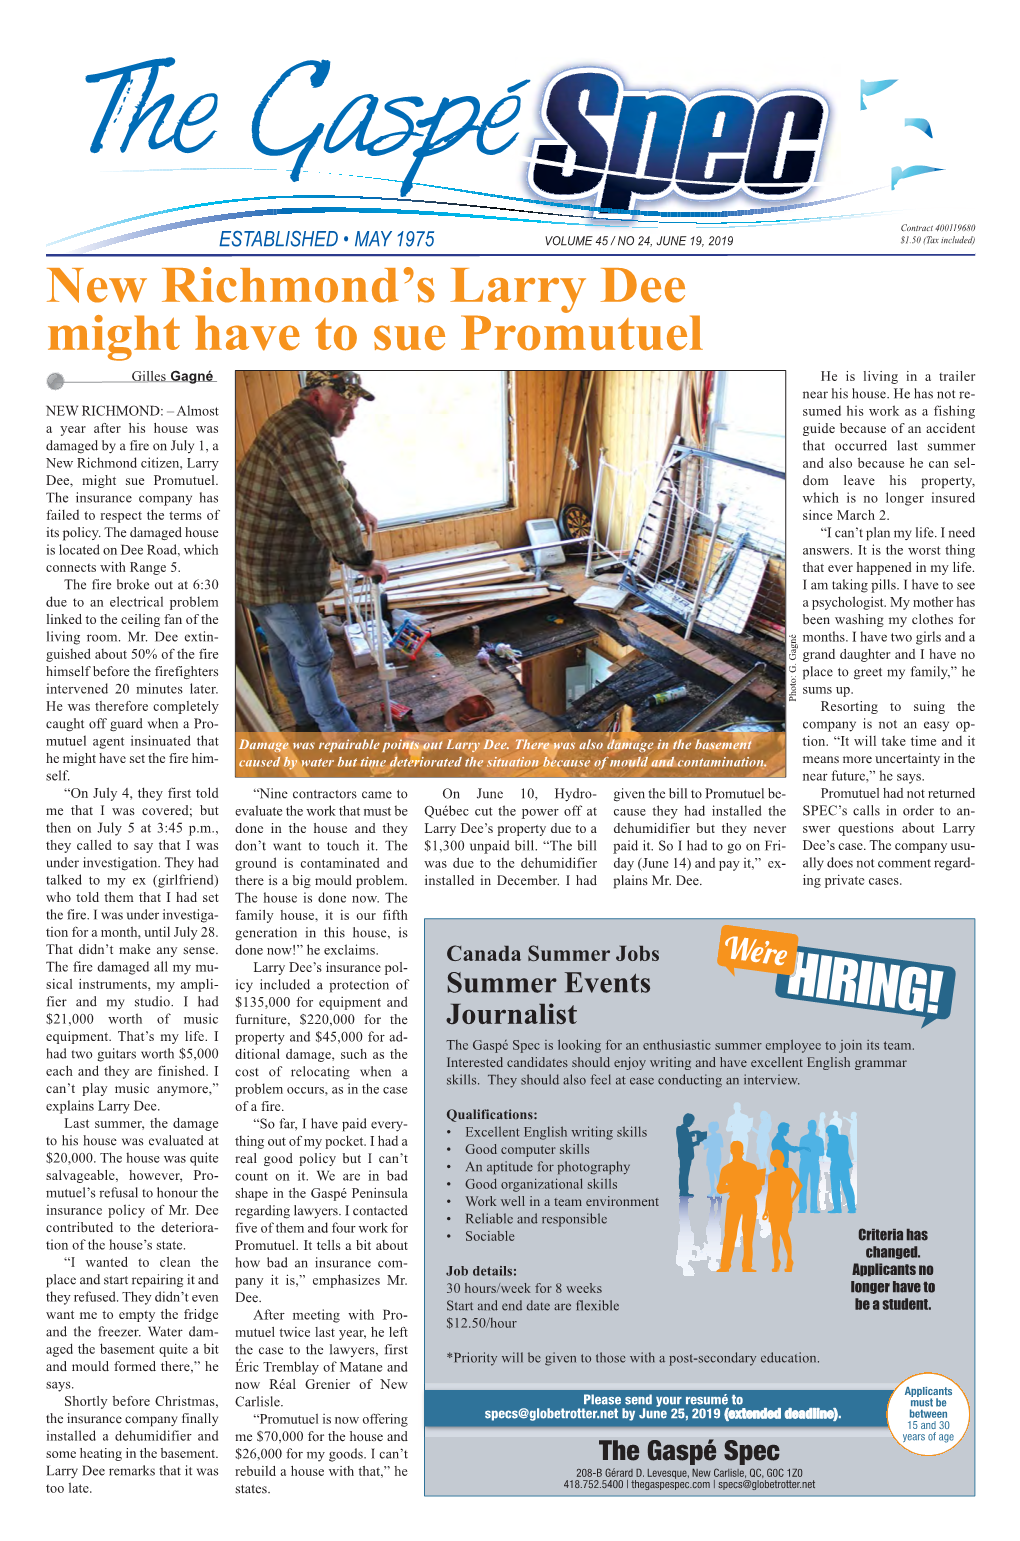 New Richmond's Larry Dee Might Have to Sue Promutuel